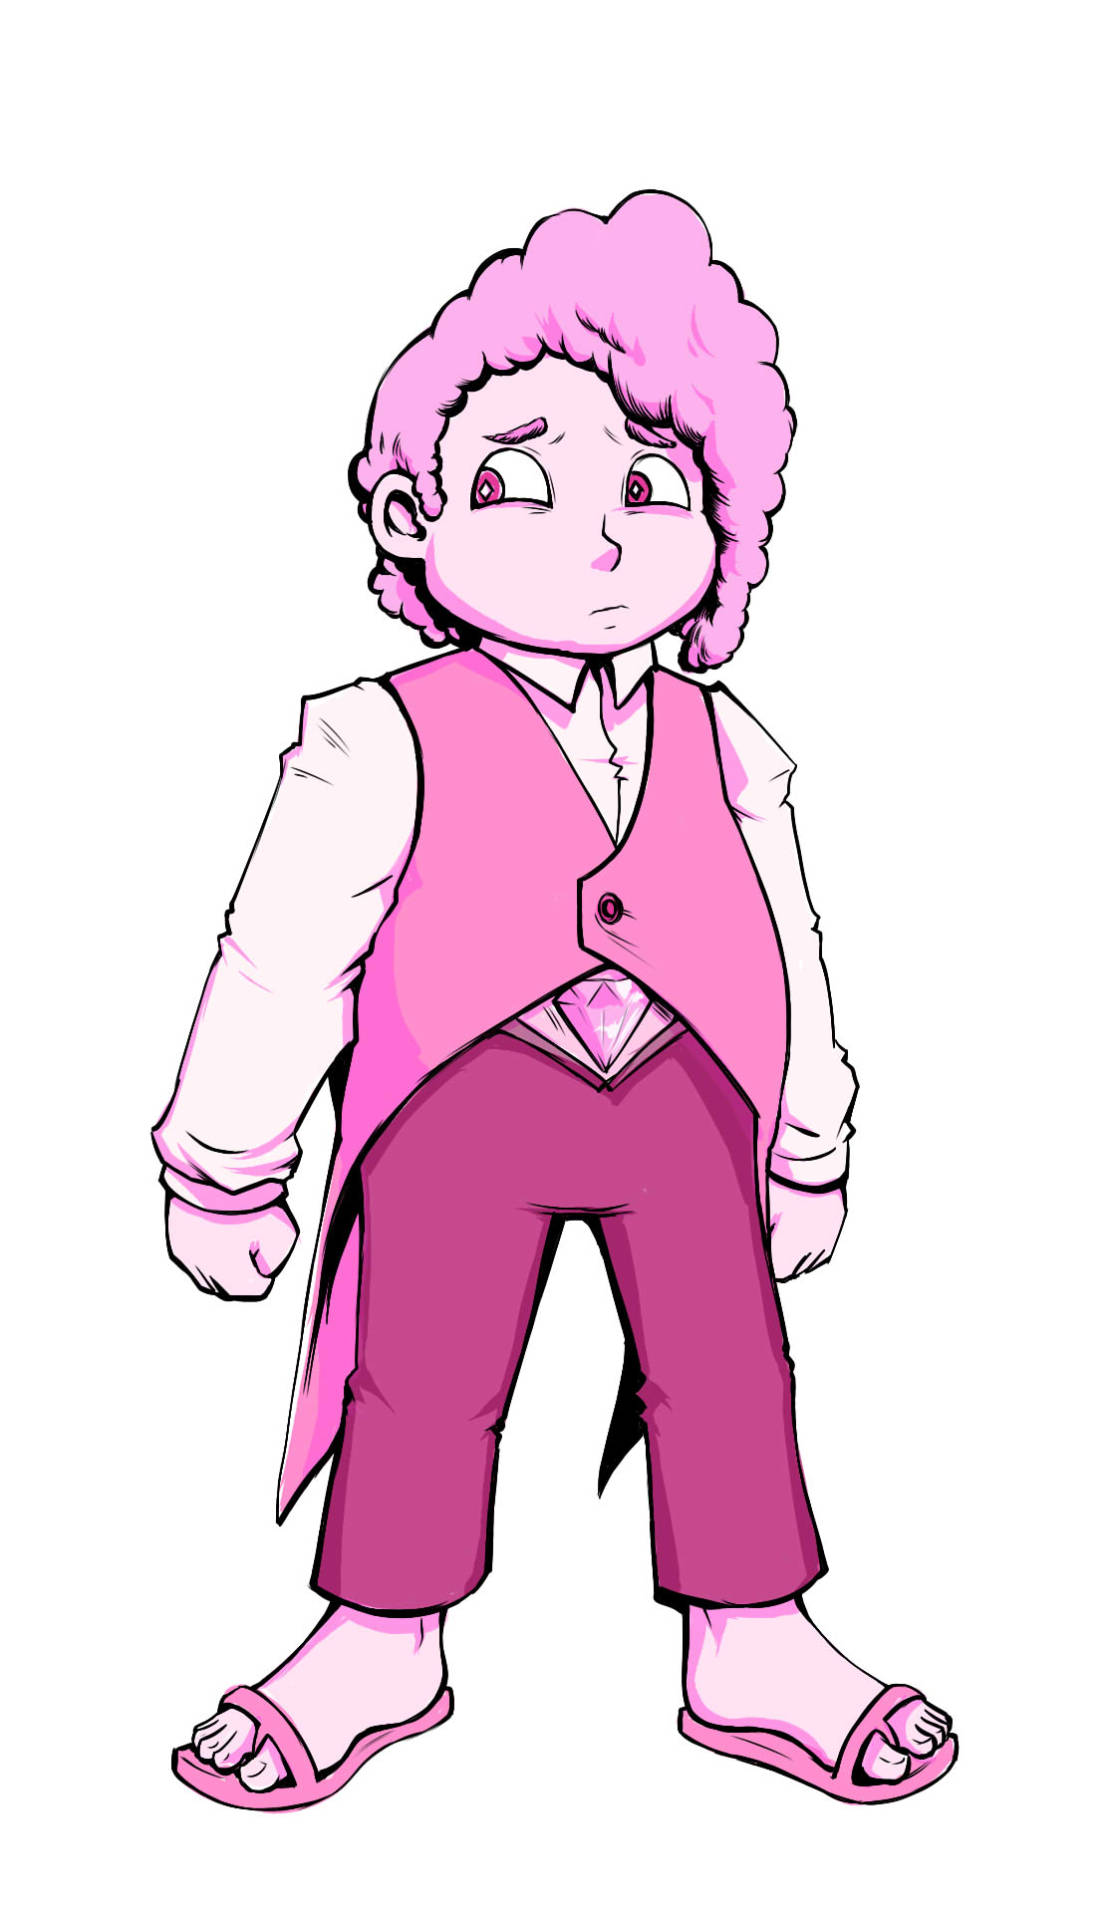 I wanted to do this before it was even confirmed, but now that it is I’m getting on it while I have some non-adult work free time. Diamond Steven wooo.